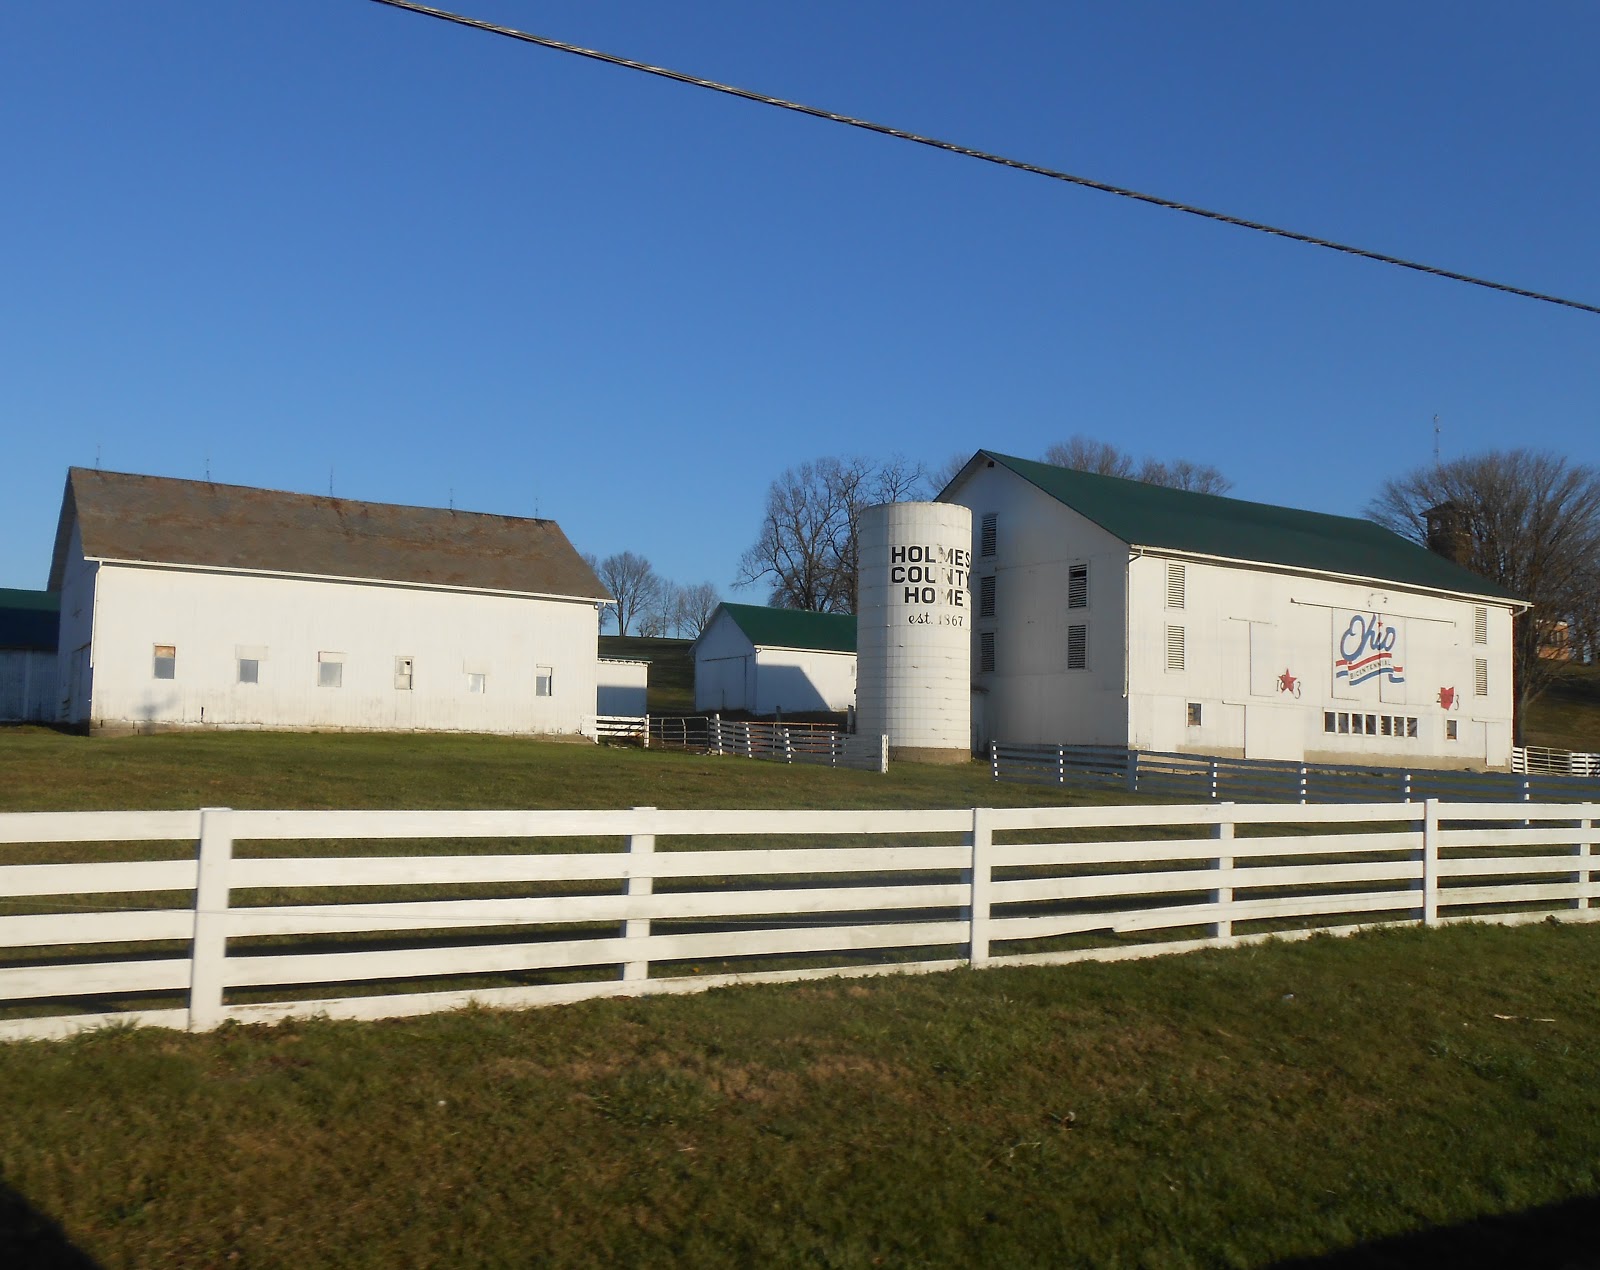 This is the Bicentennial barn in Holmes County, Ohio